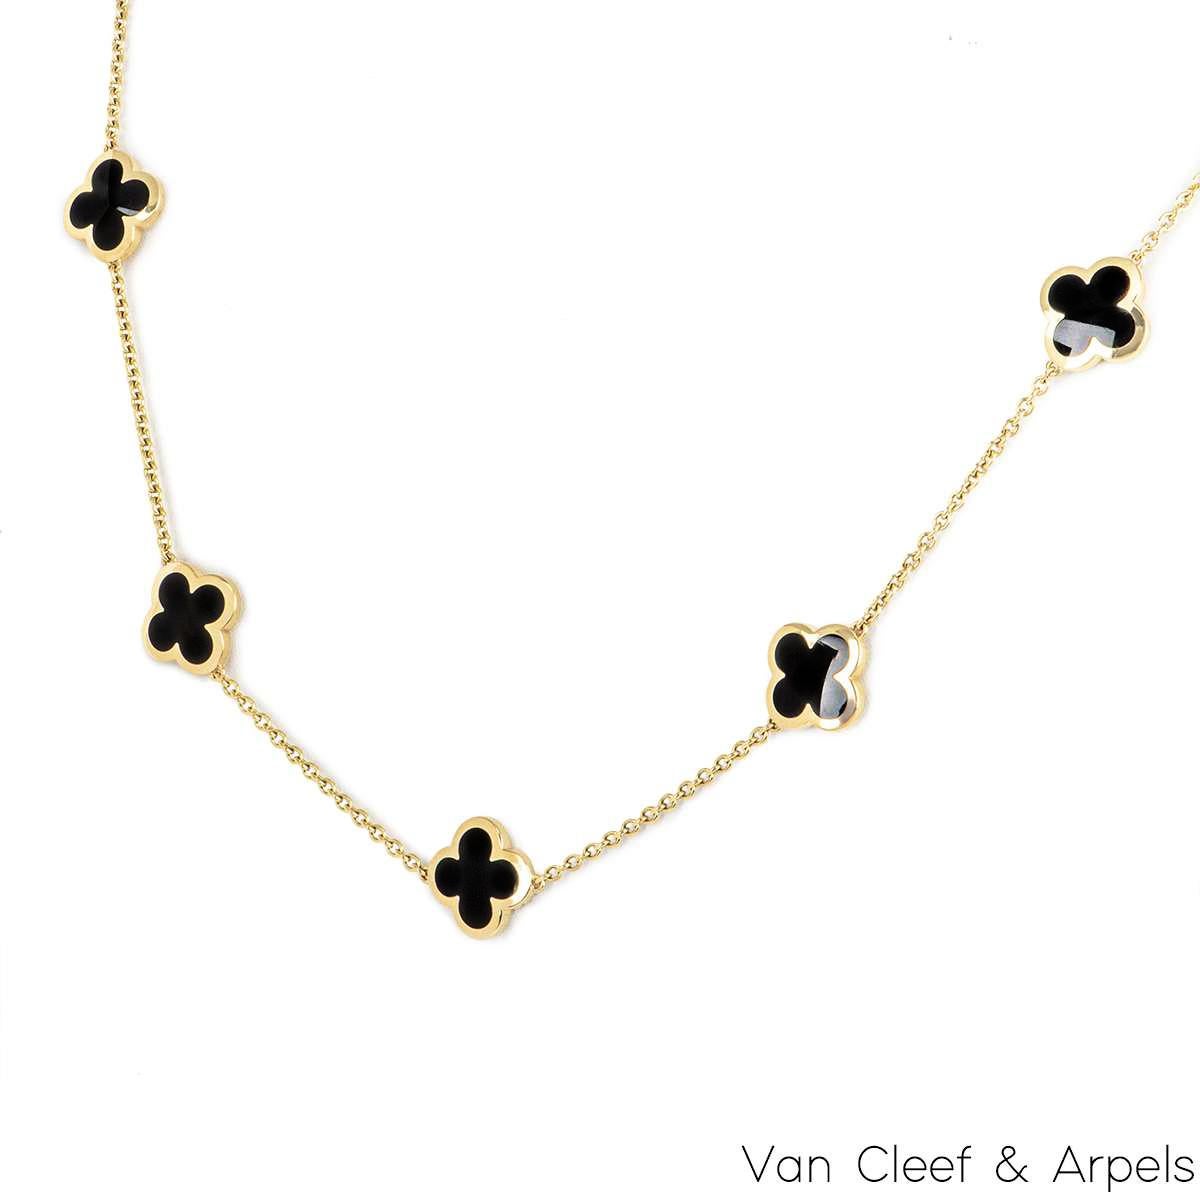 A beautiful 18k yellow gold Pure Alhambra necklace by Van Cleef & Arpels. The necklace is composed of 9 iconic four leaf clover motifs, set to the centre with onyx inlays and a polished outer edge. The necklace measures 16 inches in length, finishes